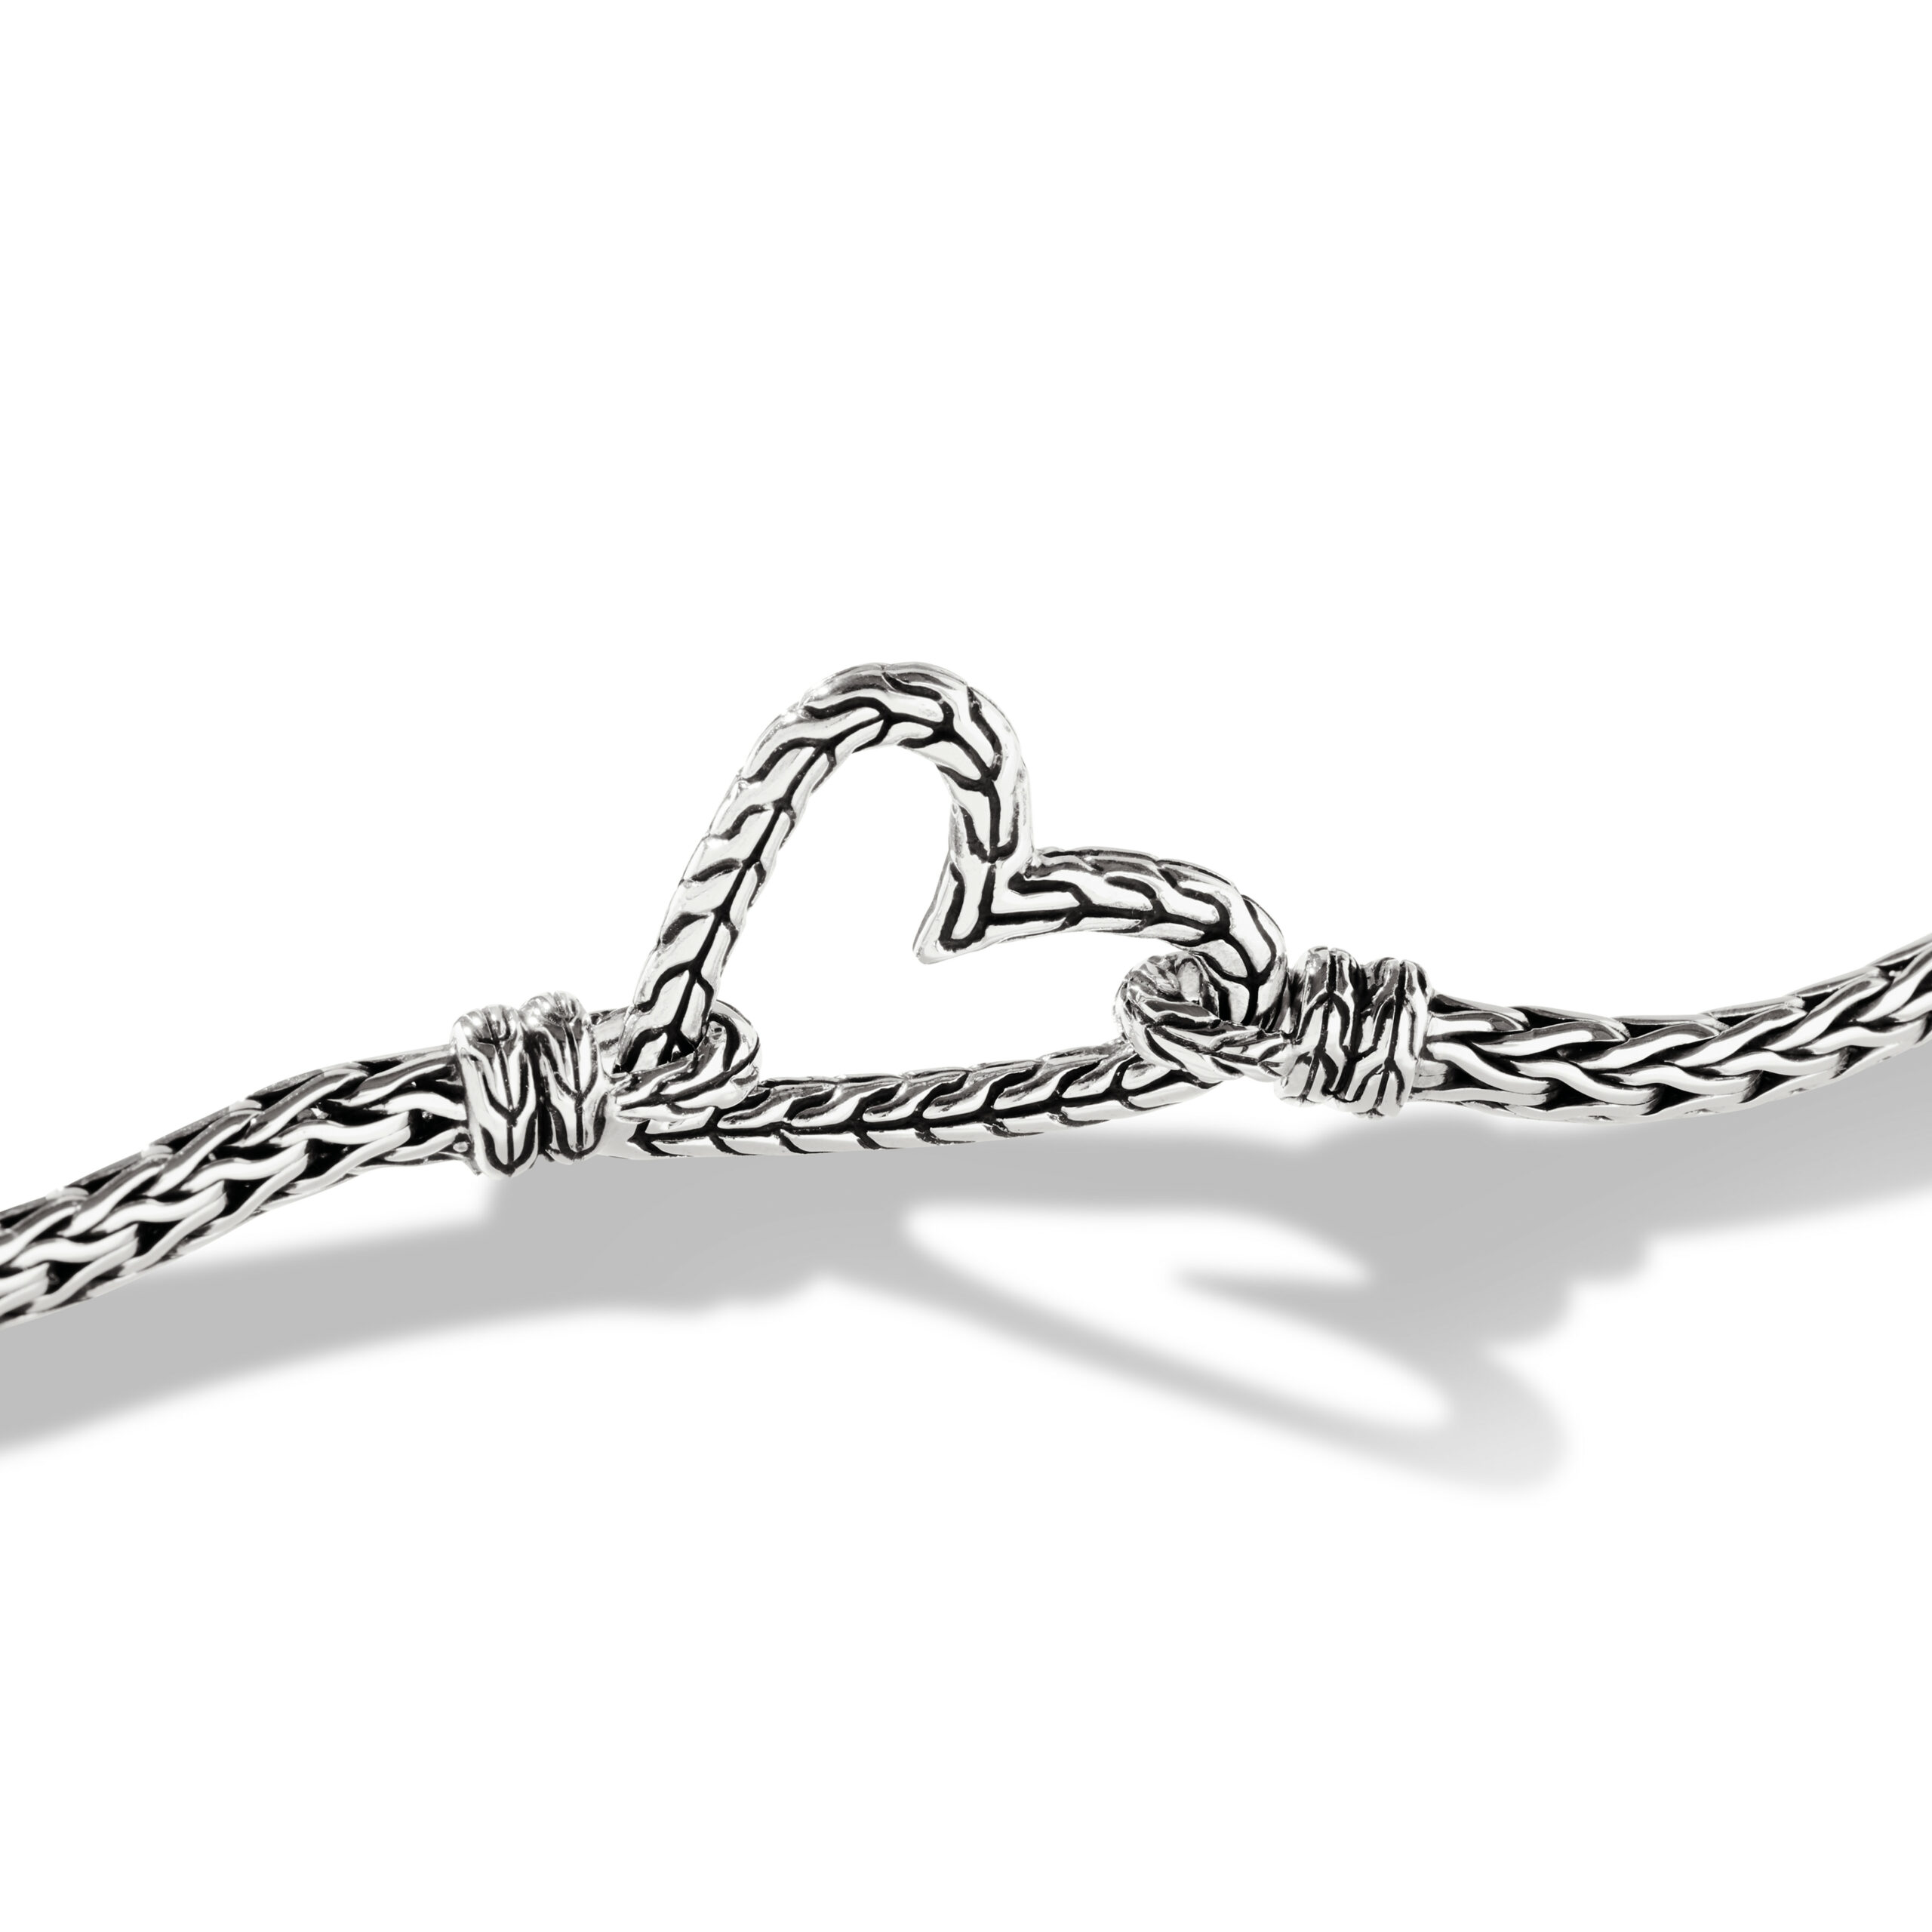 This bracelet by John Hardy is crafted from sterling silver and features a heart.